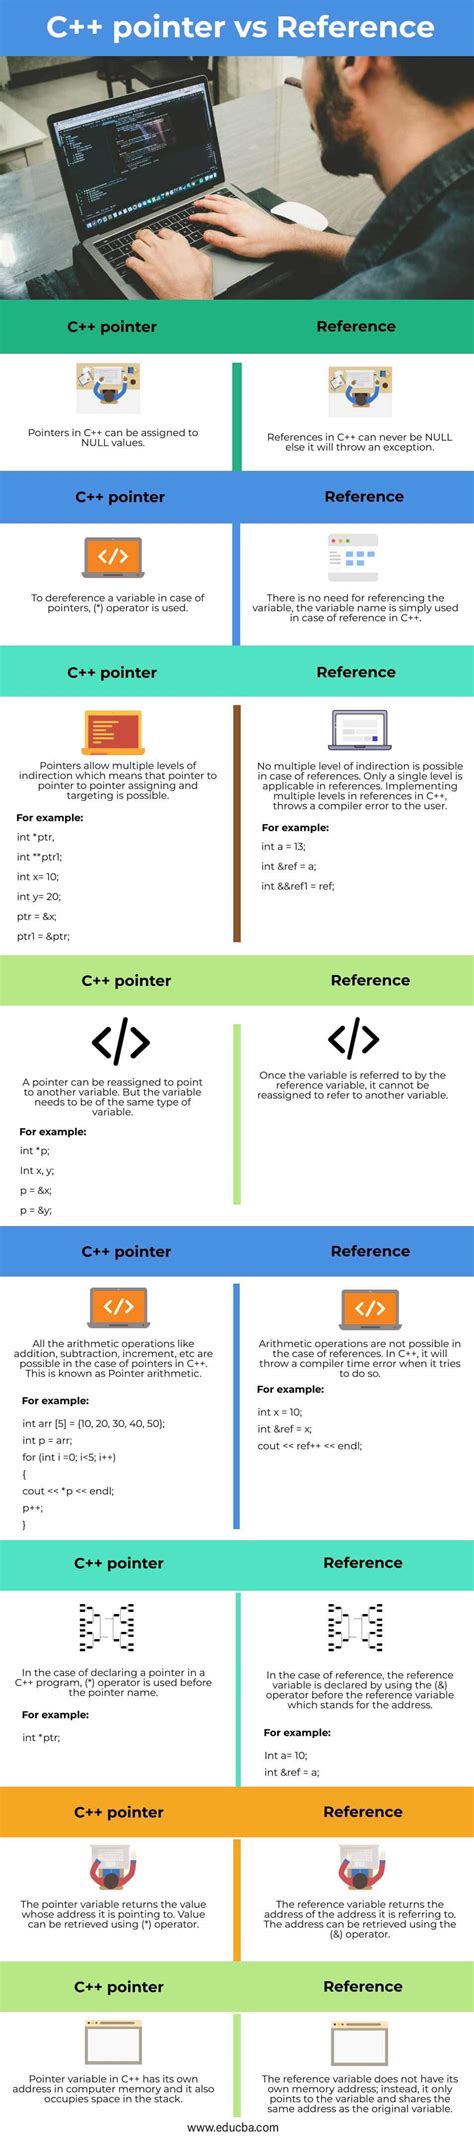 C Pointer Vs Reference Top 8 Differences You Should Know